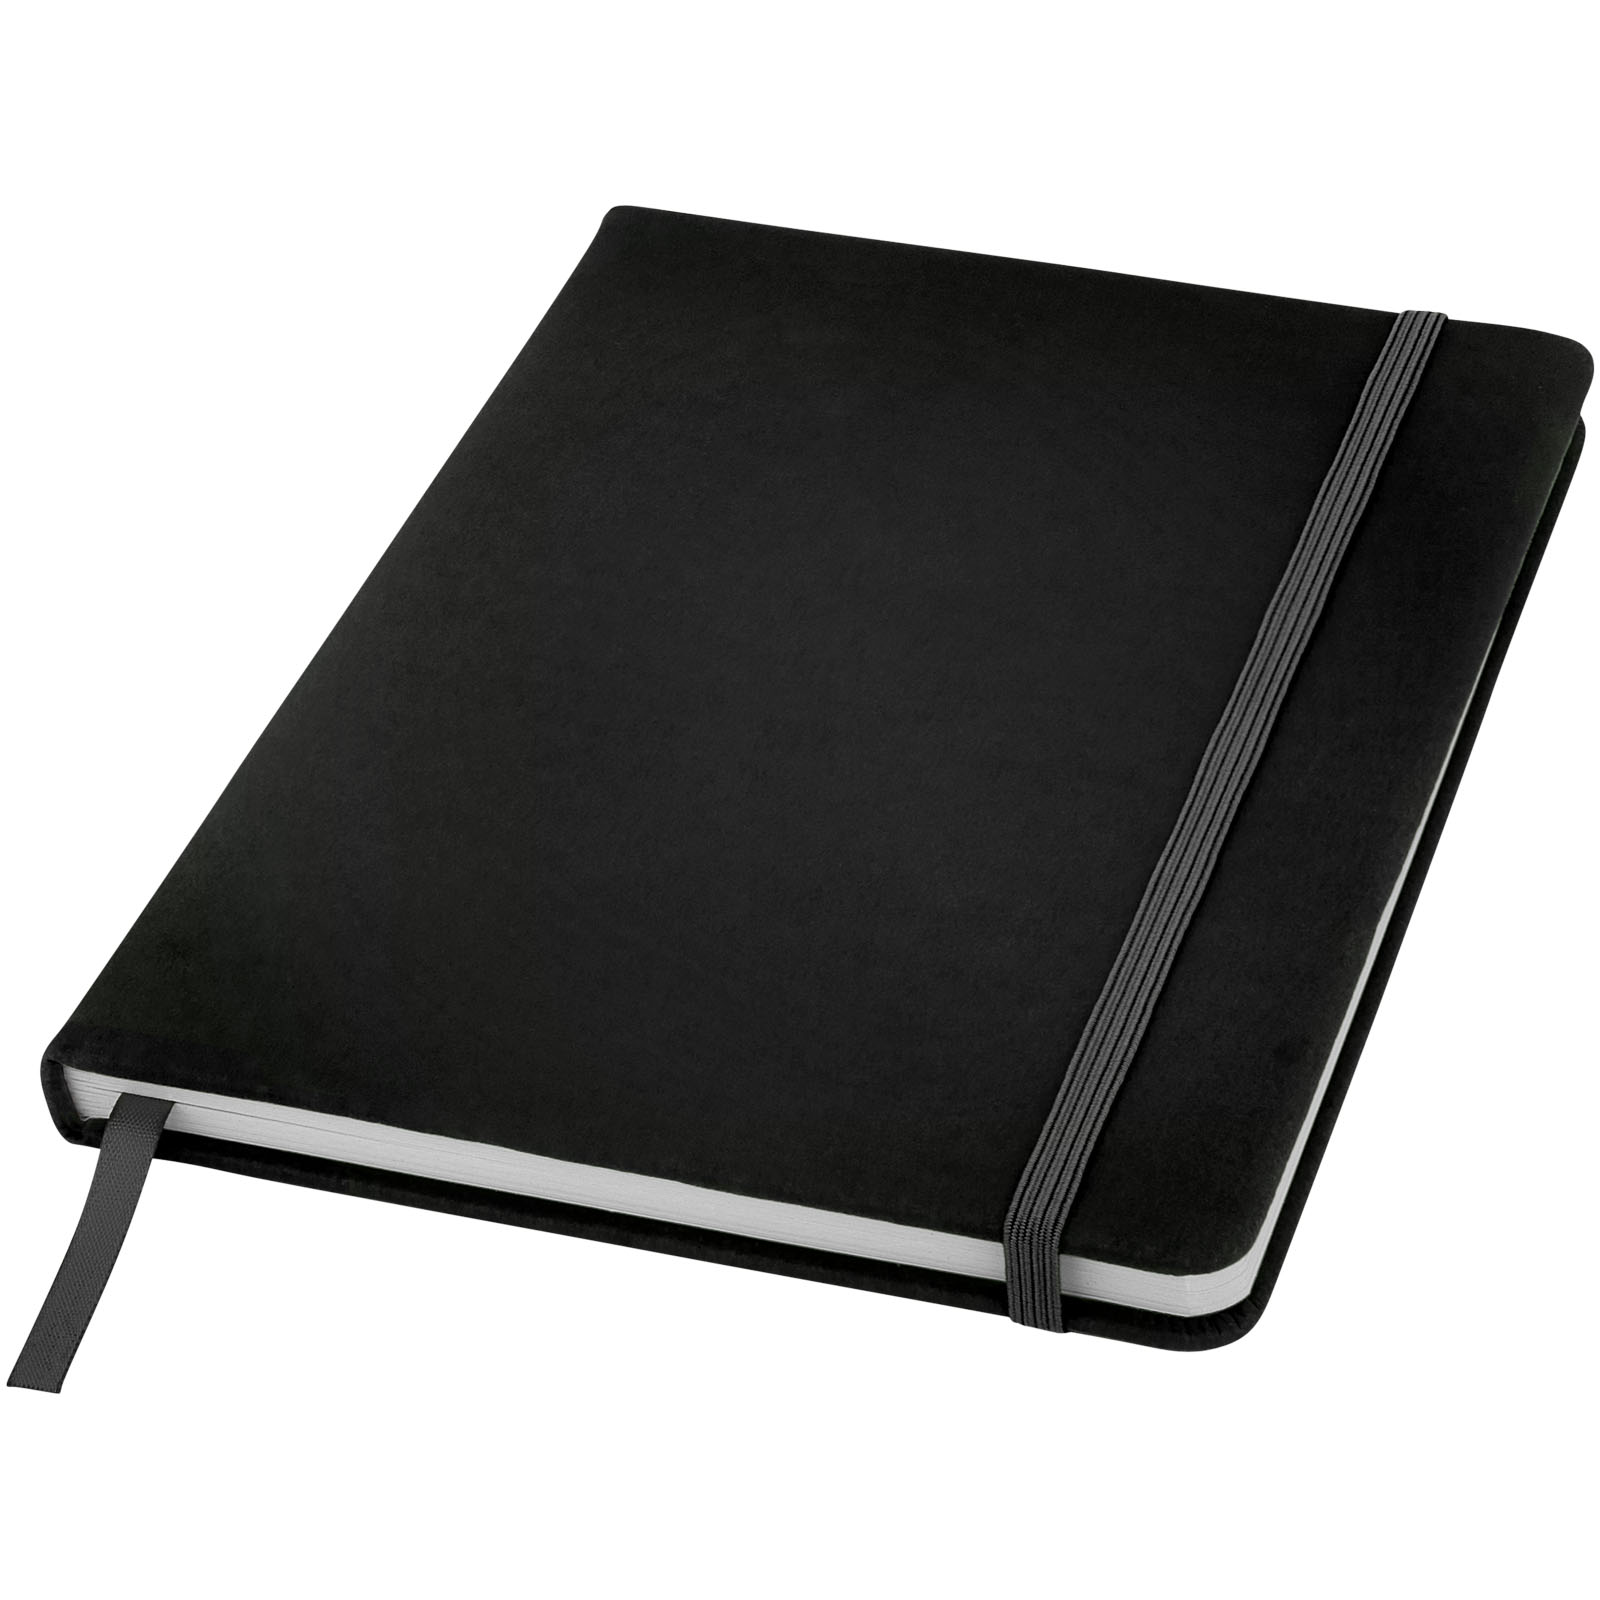 Hard cover notebooks - Spectrum A5 notebook with dotted pages